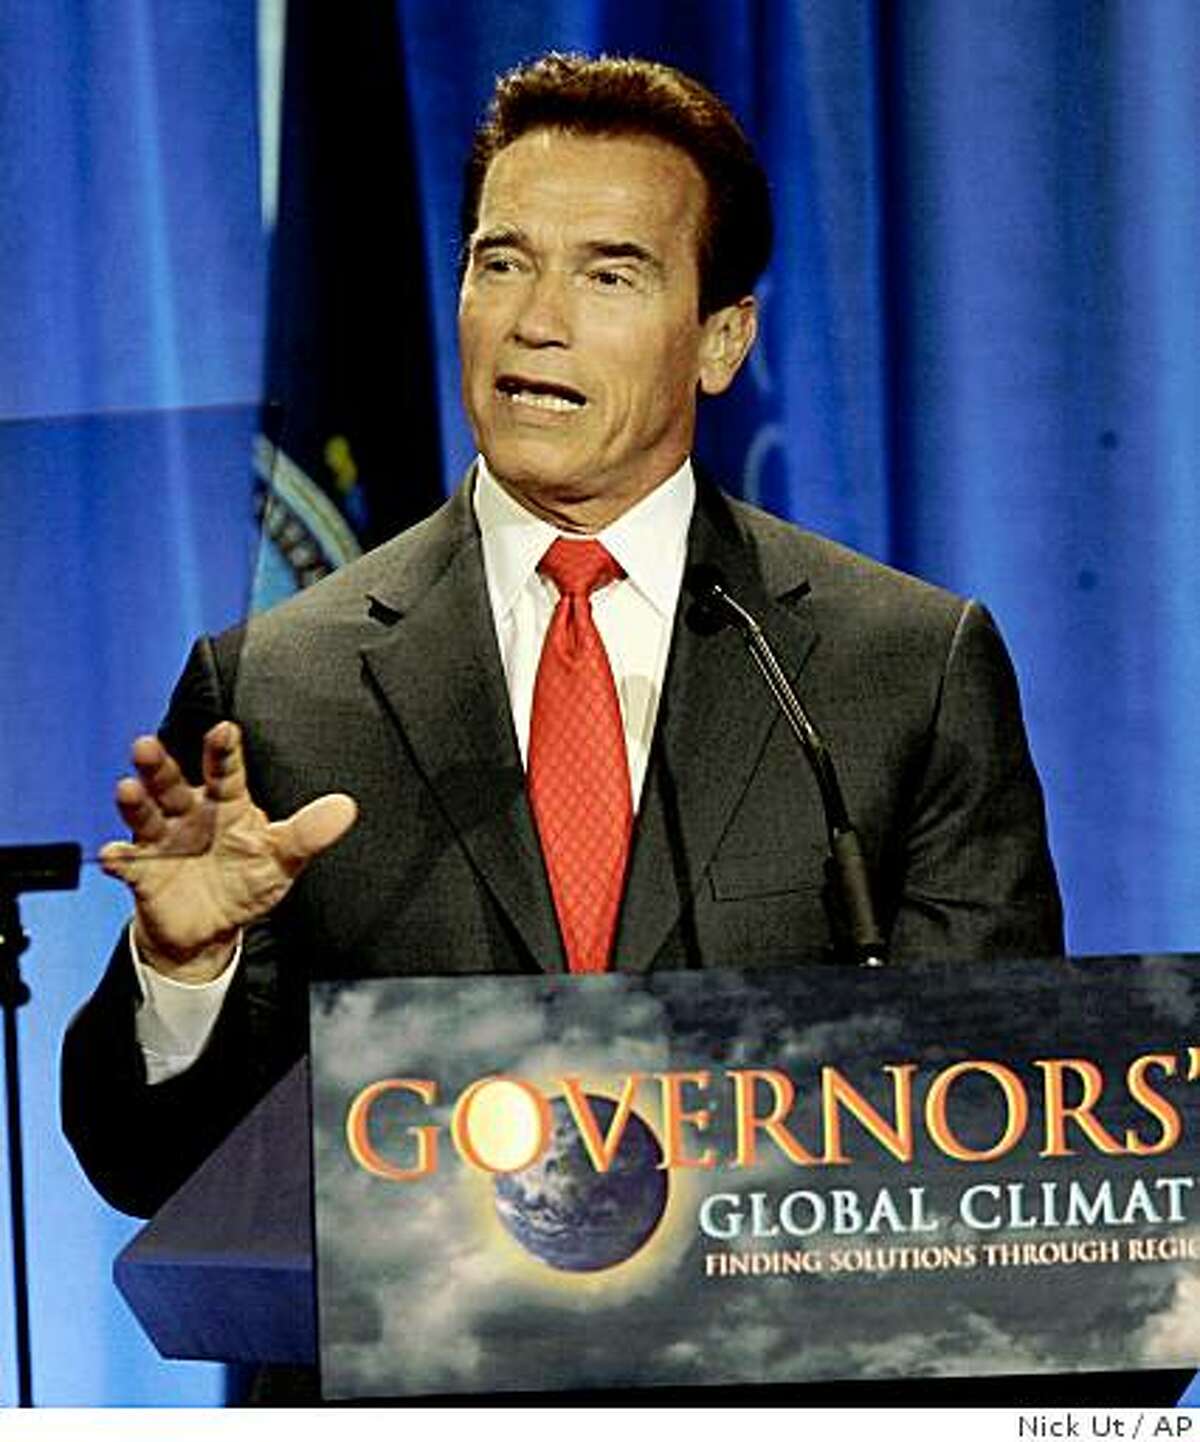 California Gov. Arnold Schwarzenegger speaks at the Governors' Global Climate Summit in Beverly Hills, Calif., Wednesday, Nov 19, 2008. Schwarzenegger, who has advocated strict reductions in greenhouse gas emissions, said he organized the gathering to show local governments in other countries that emissions can be cut without harming the economy.(AP Photo/Nick Ut)